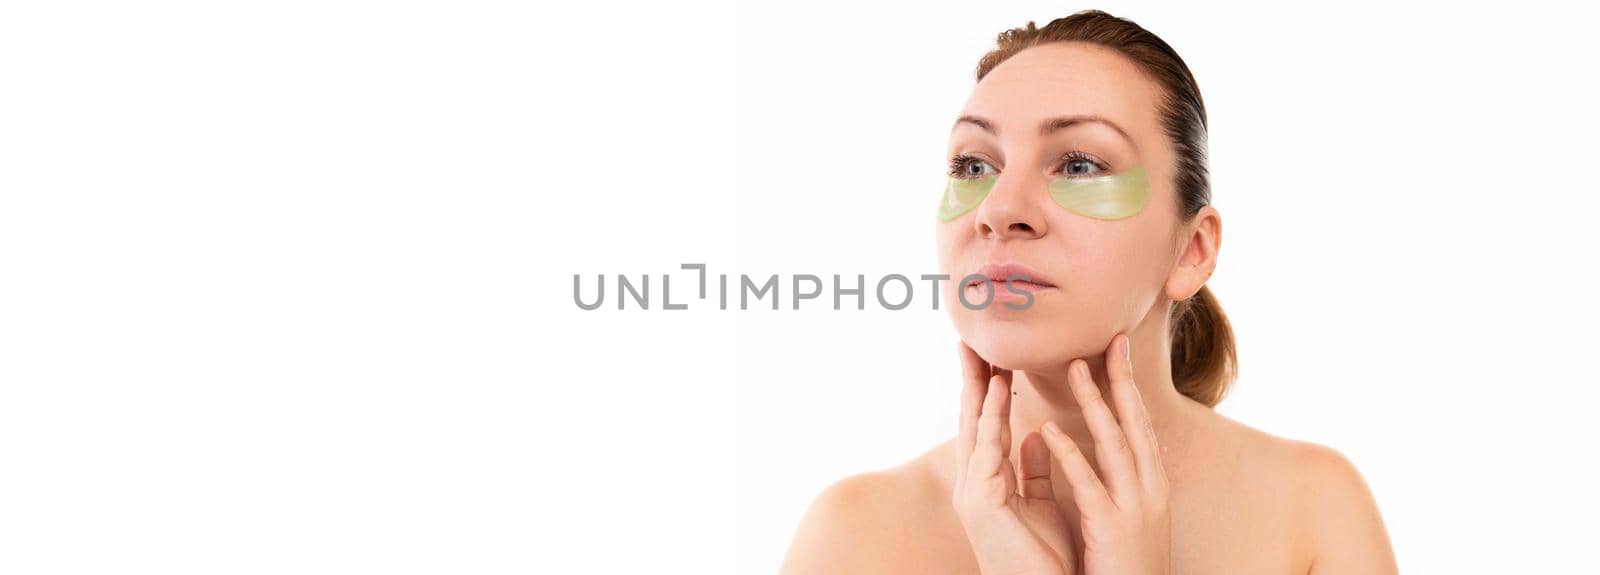 young woman on after cosmetic procedures touches the skin of the face with her hands, under the eyes cosmetic patches of light green color